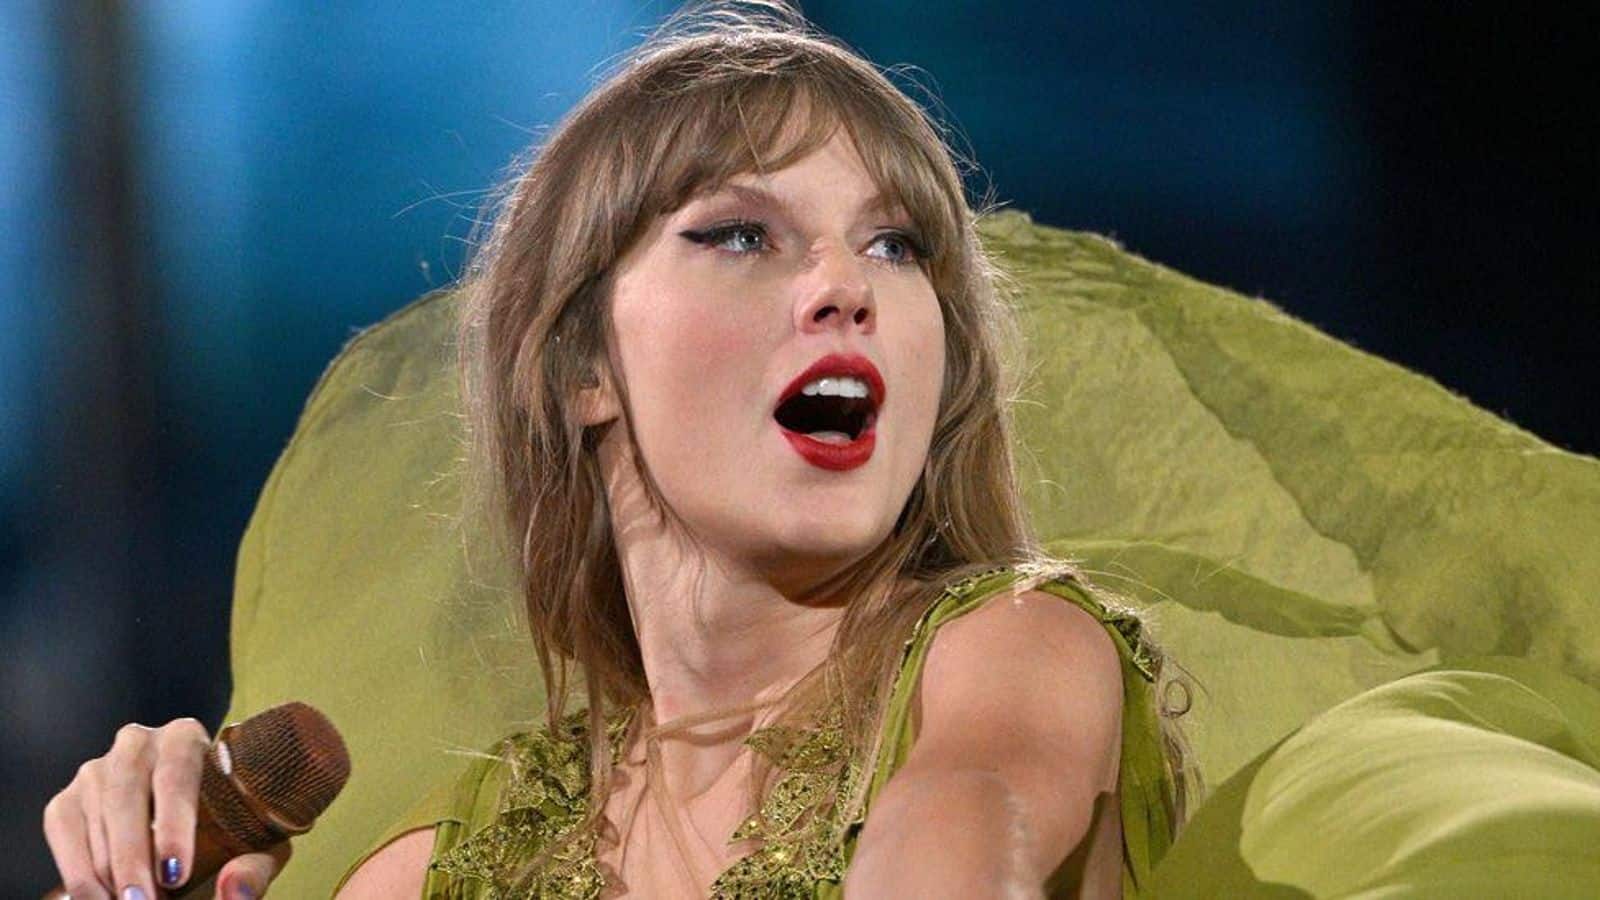 Facebook under fire for inaction on Taylor Swift ticket scam